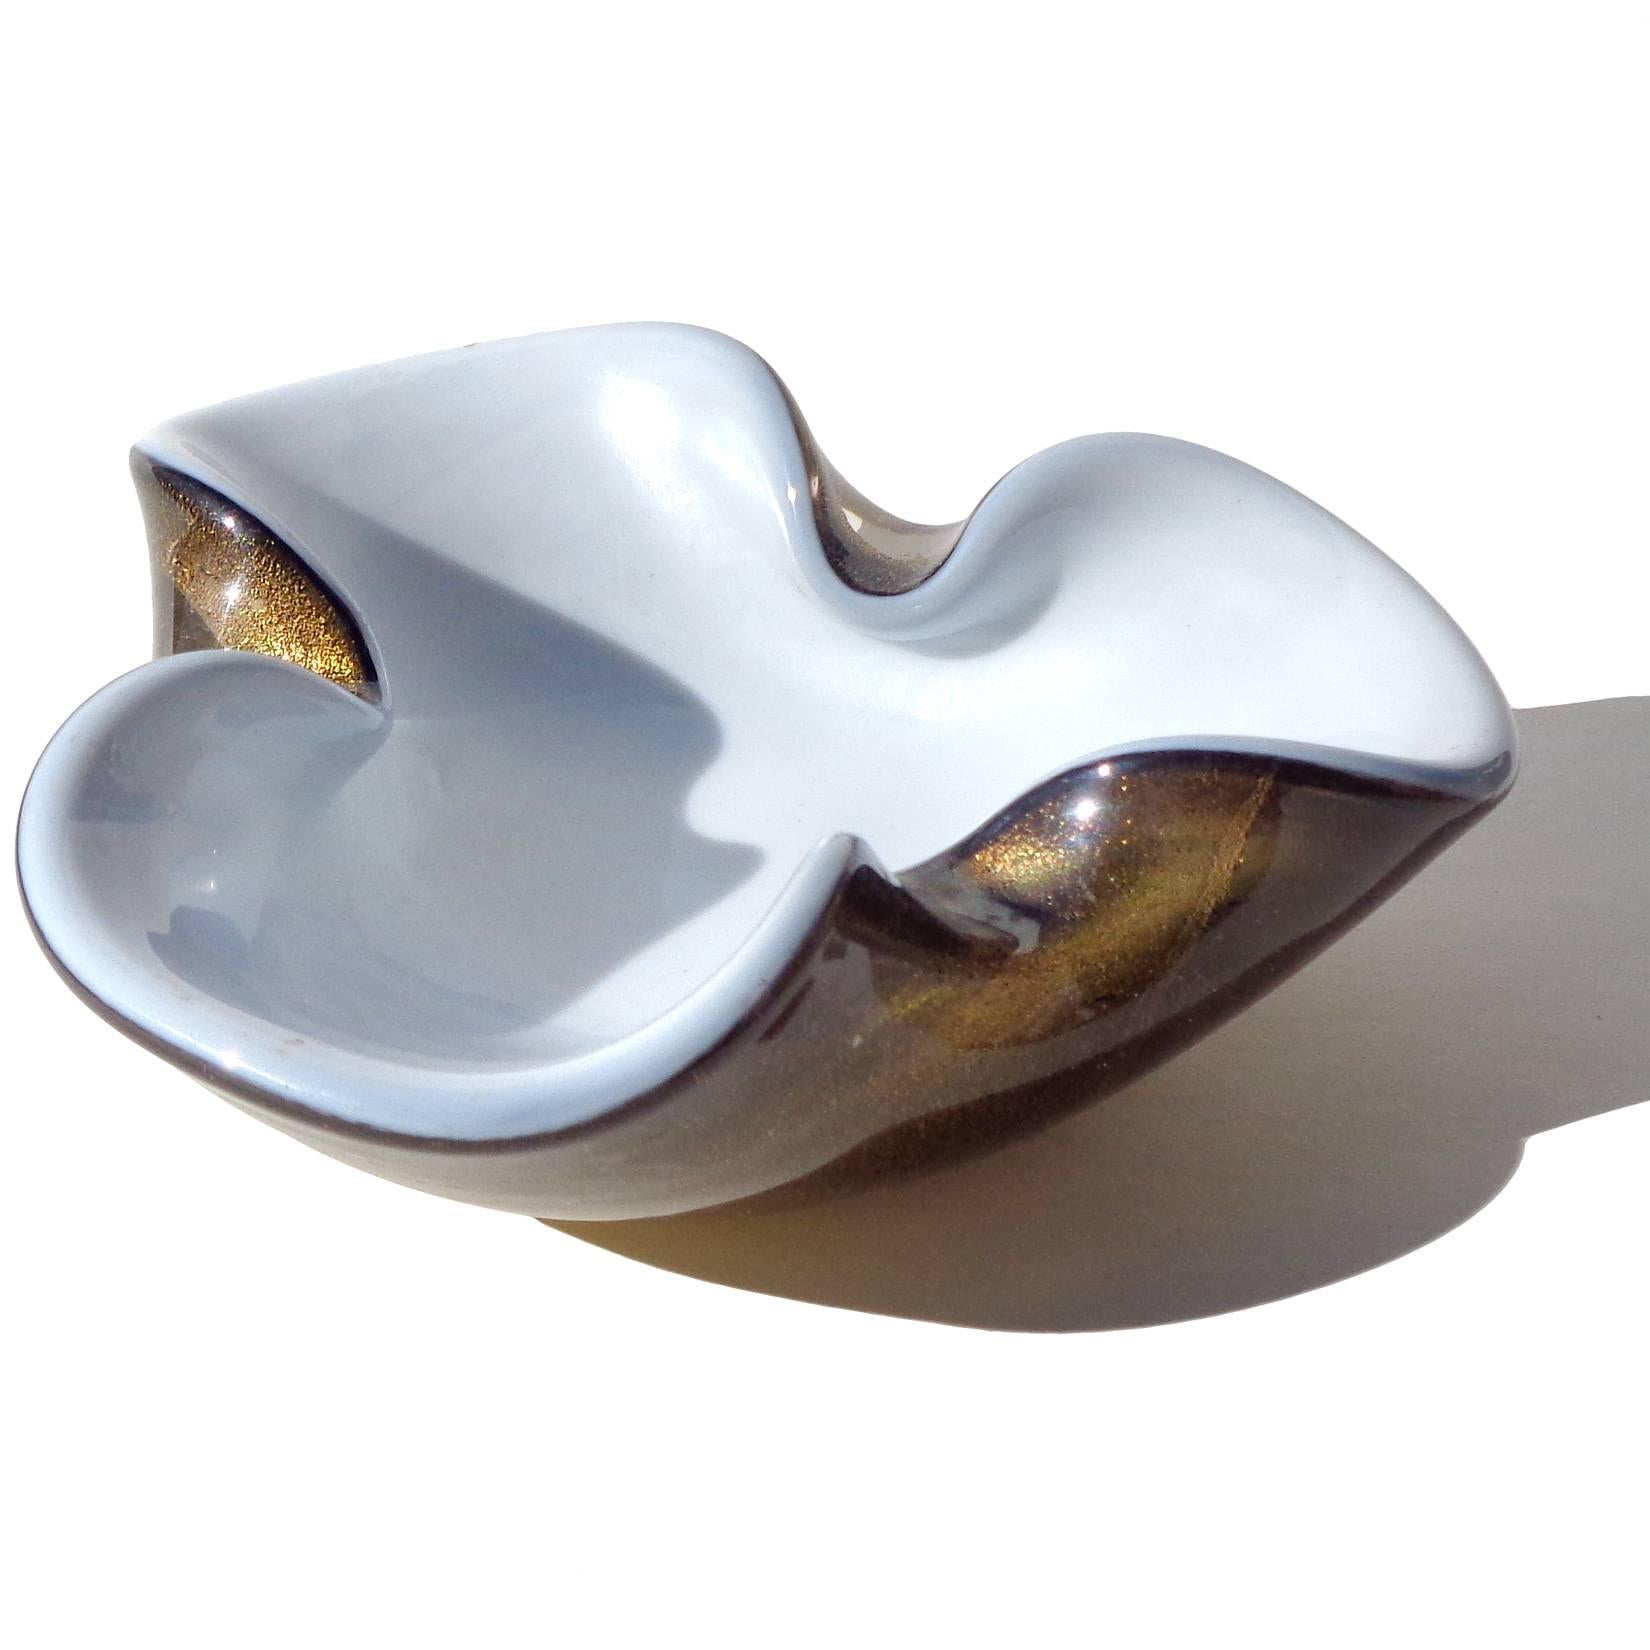 Free shipping worldwide! See details below description.

Beautiful Murano handblown pearl white, black and gold flecks art glass decorative bowl / ashtray. The piece is profusely covered in gold leaf on the outside, with iridescent surface.